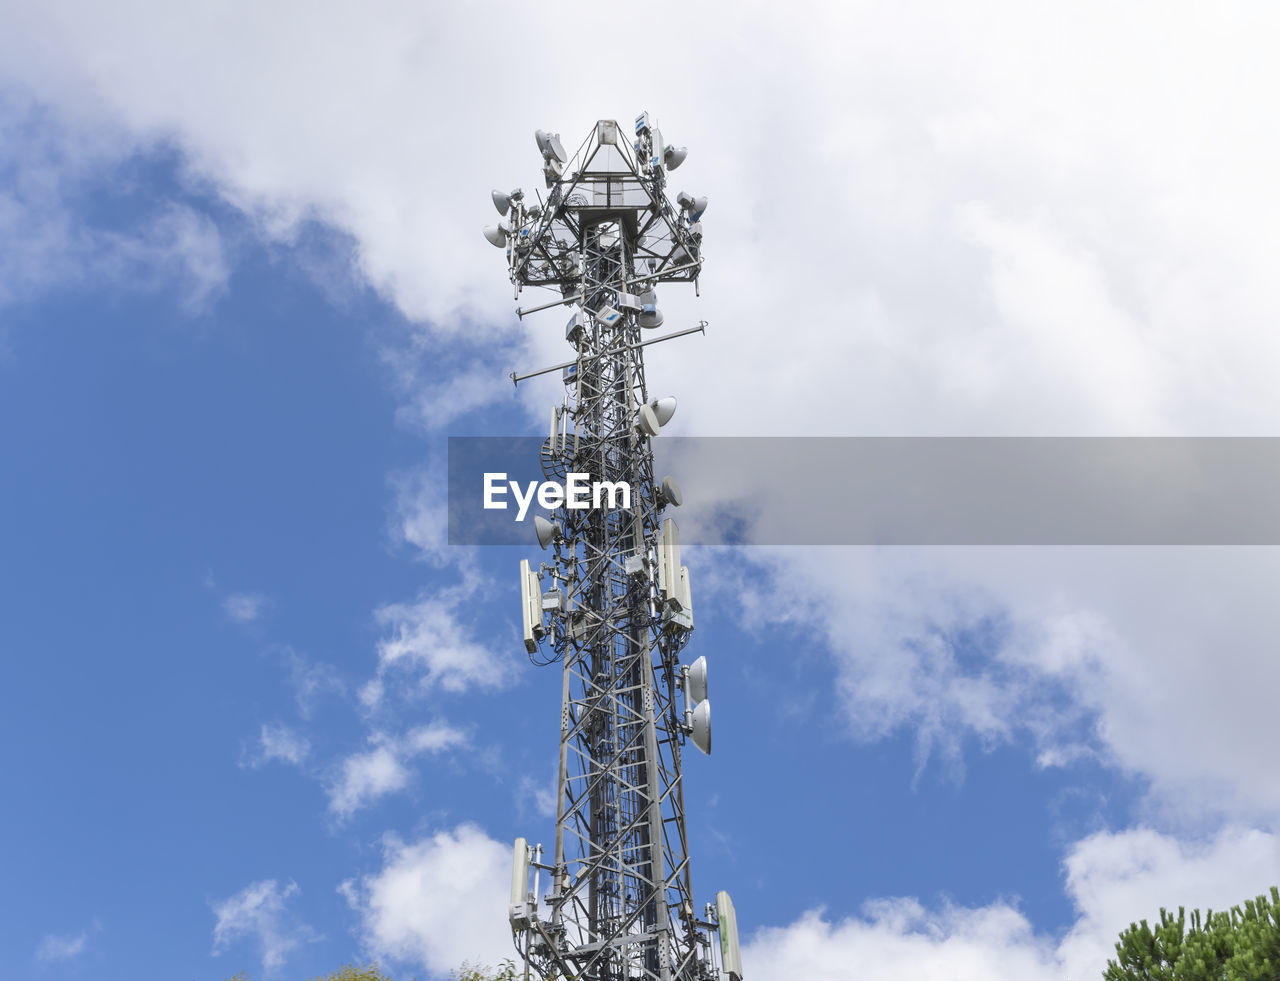 Broadcasting and gsm operators antennas on the high pylon front of bright sky